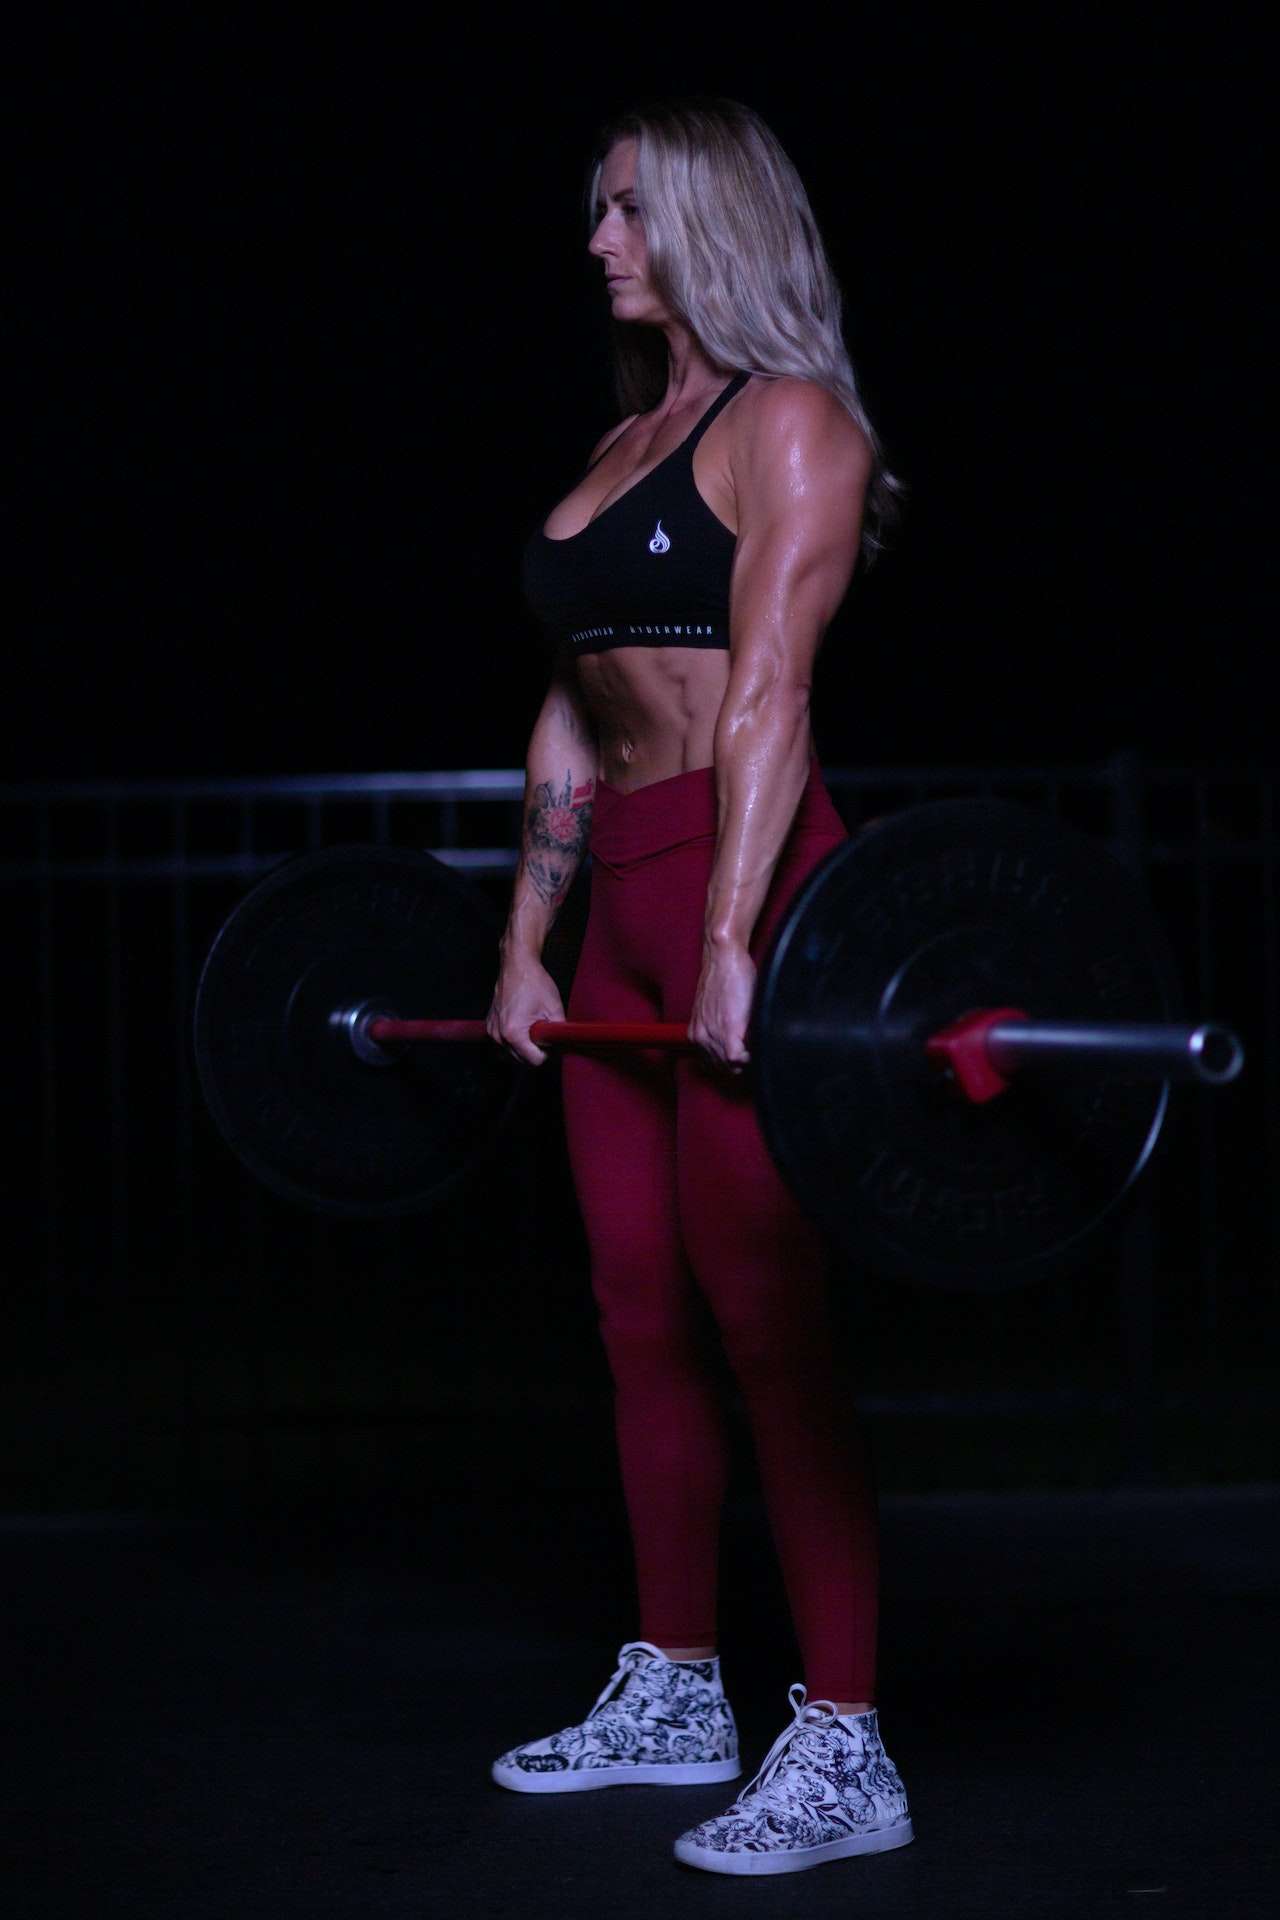 A Woman in Red and Black Sportswear Lifting Barbell
